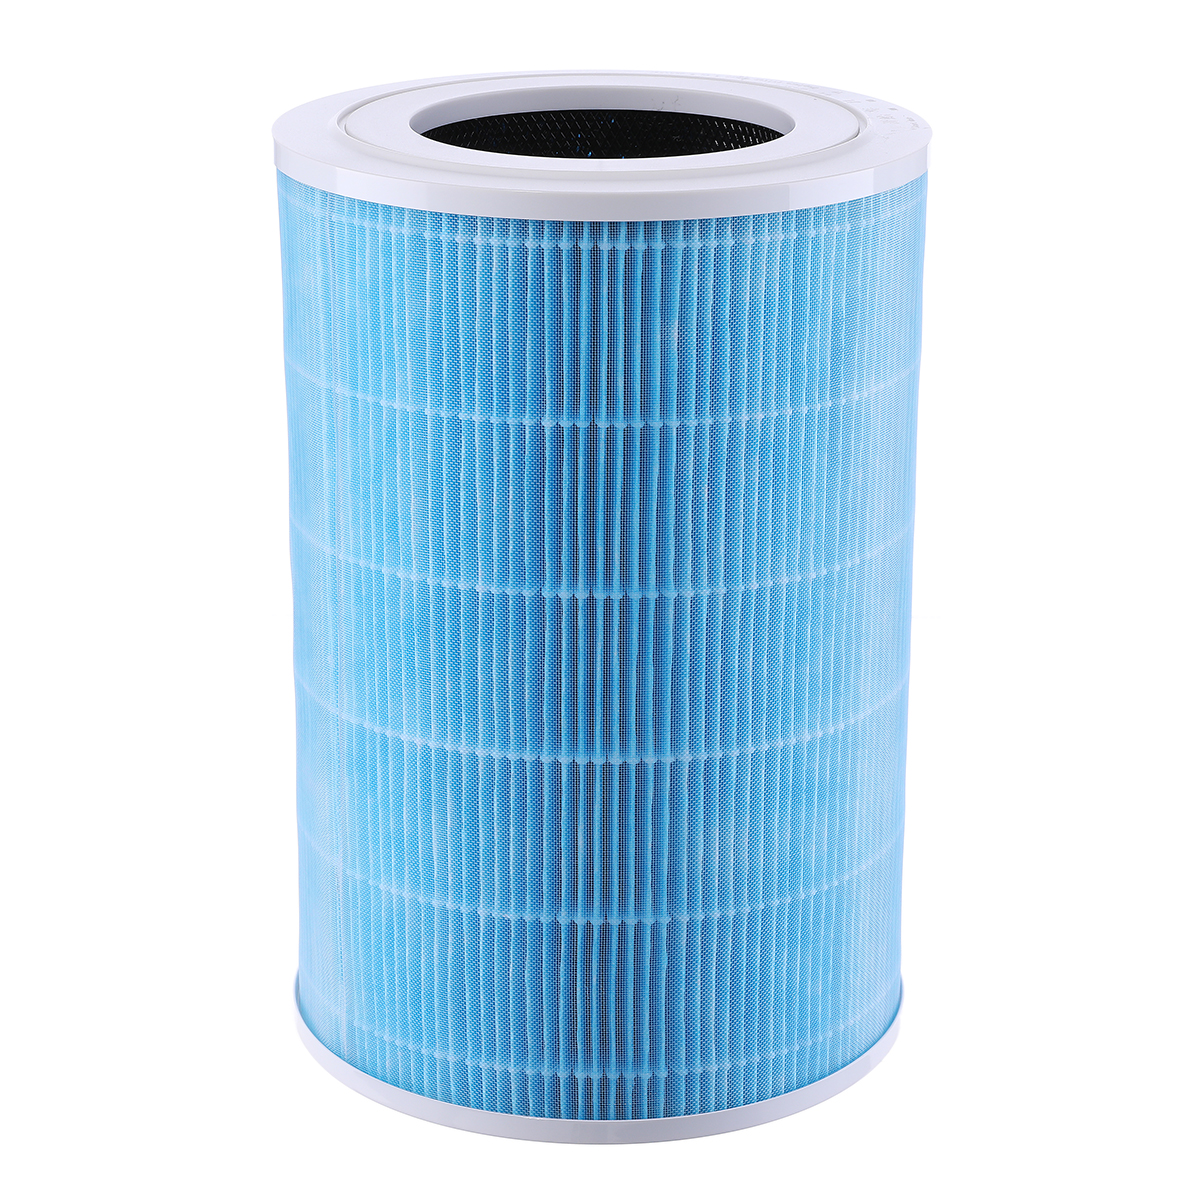 

Air Cullender Replacement Cleaner Filter for Xiaomi mi 1/2/2S Pro Air Purifier Home Universal Remove Dust Formaldehyde